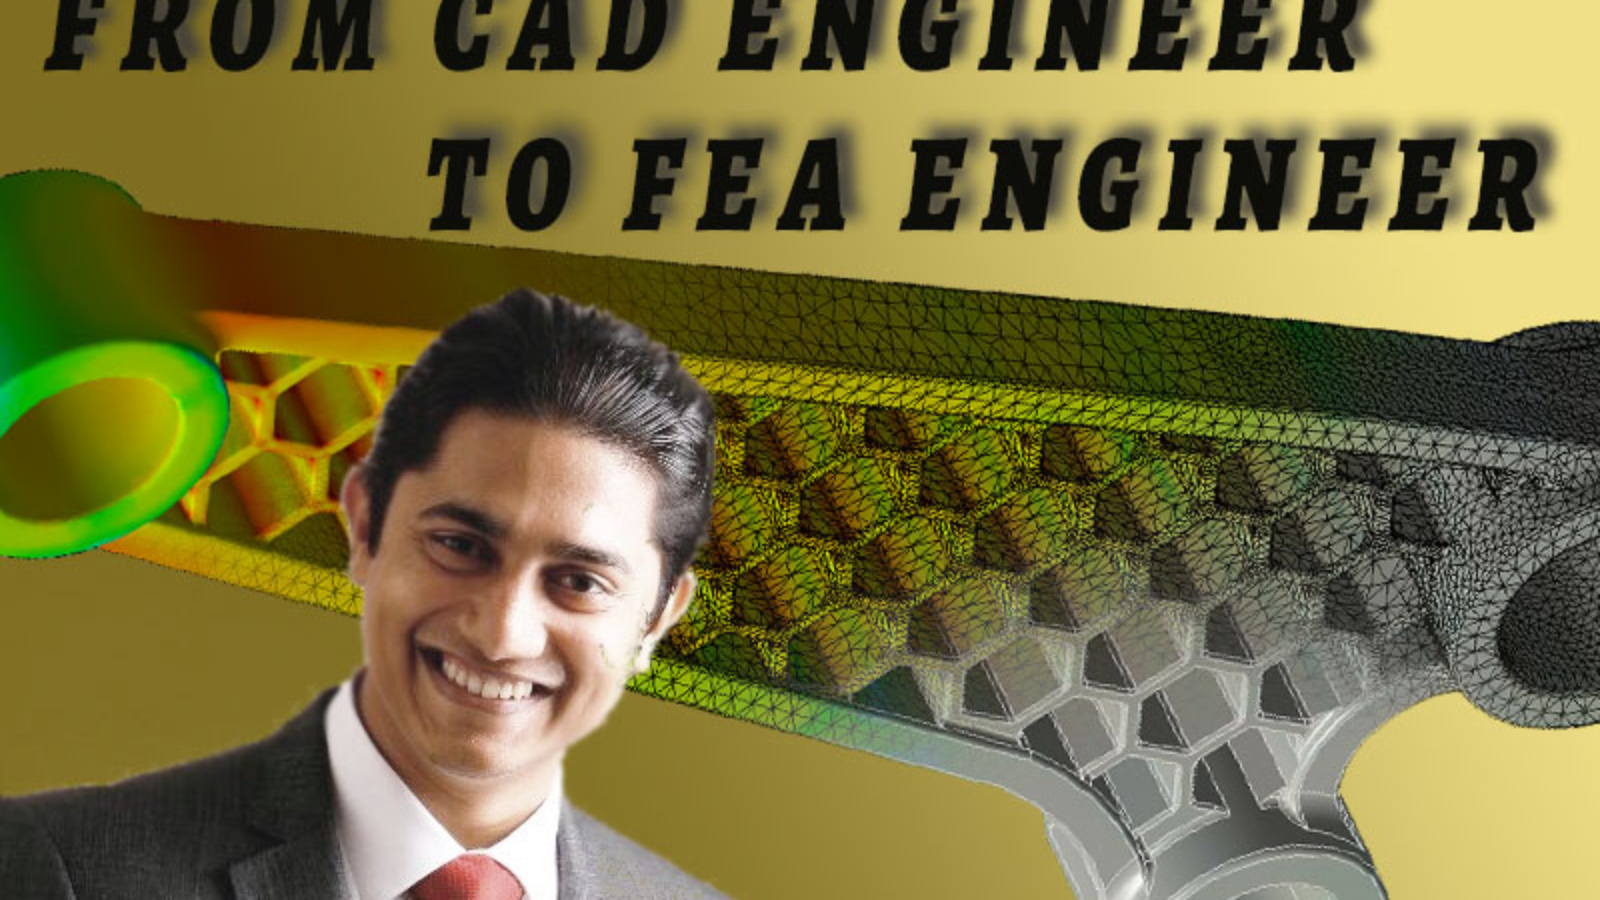 Sanju Cherian From CAD to FEA